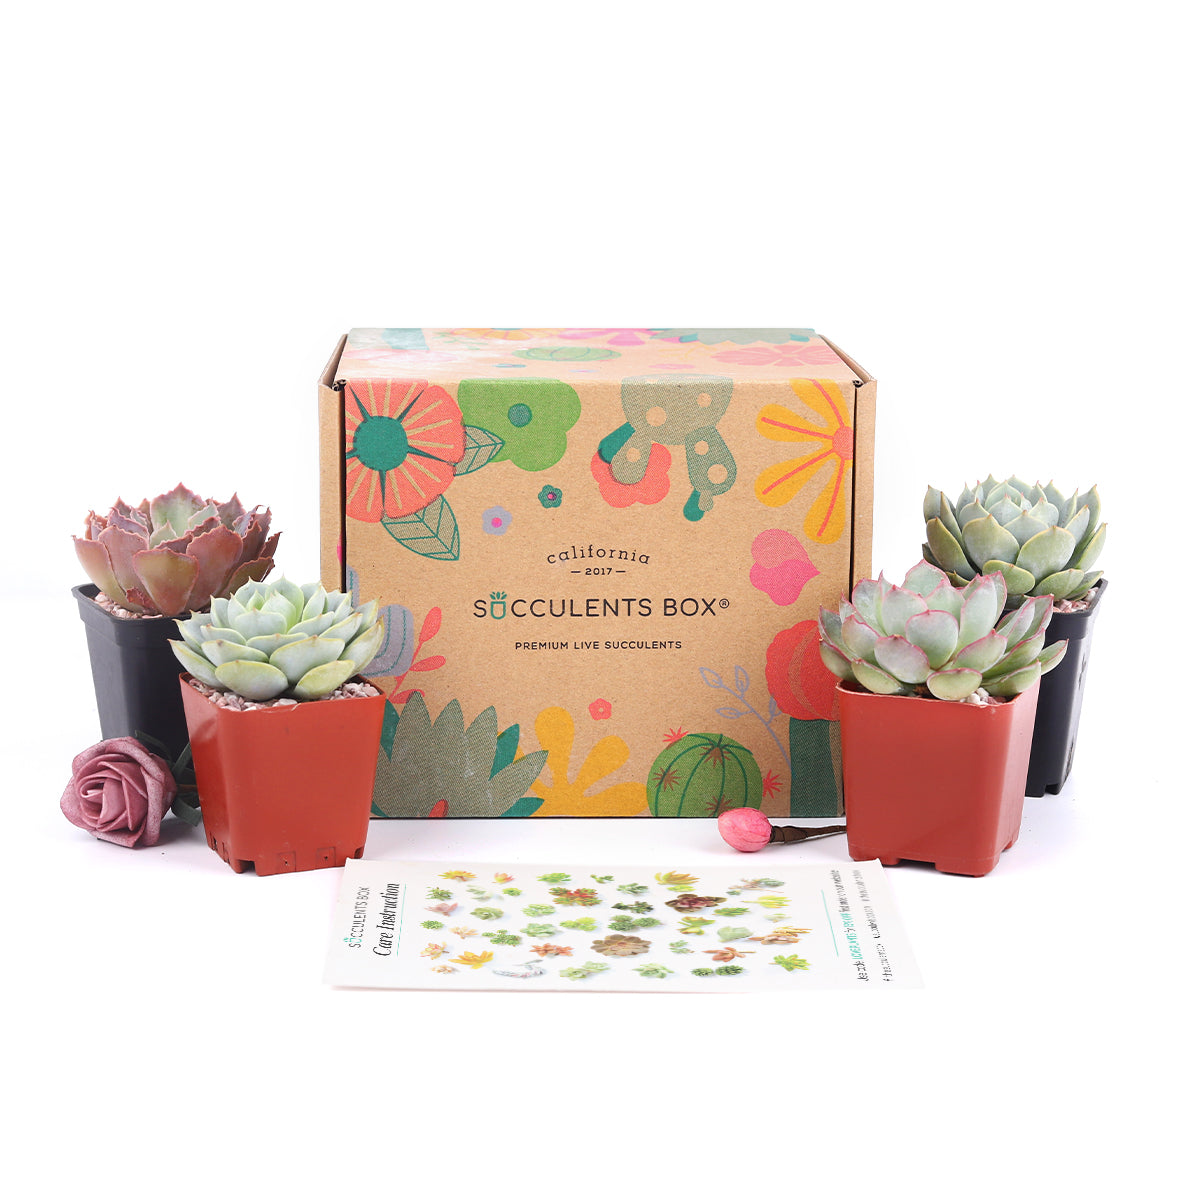 subscription box gift ideas, subscription gift box, mother's day gifts, mother's day gift ideas, best mother's day gifts, personalized mother's day gifts, Succulent Subcription Boxes for sale, Succulents for Sale, Types of Succulents, Succulents Shop in California